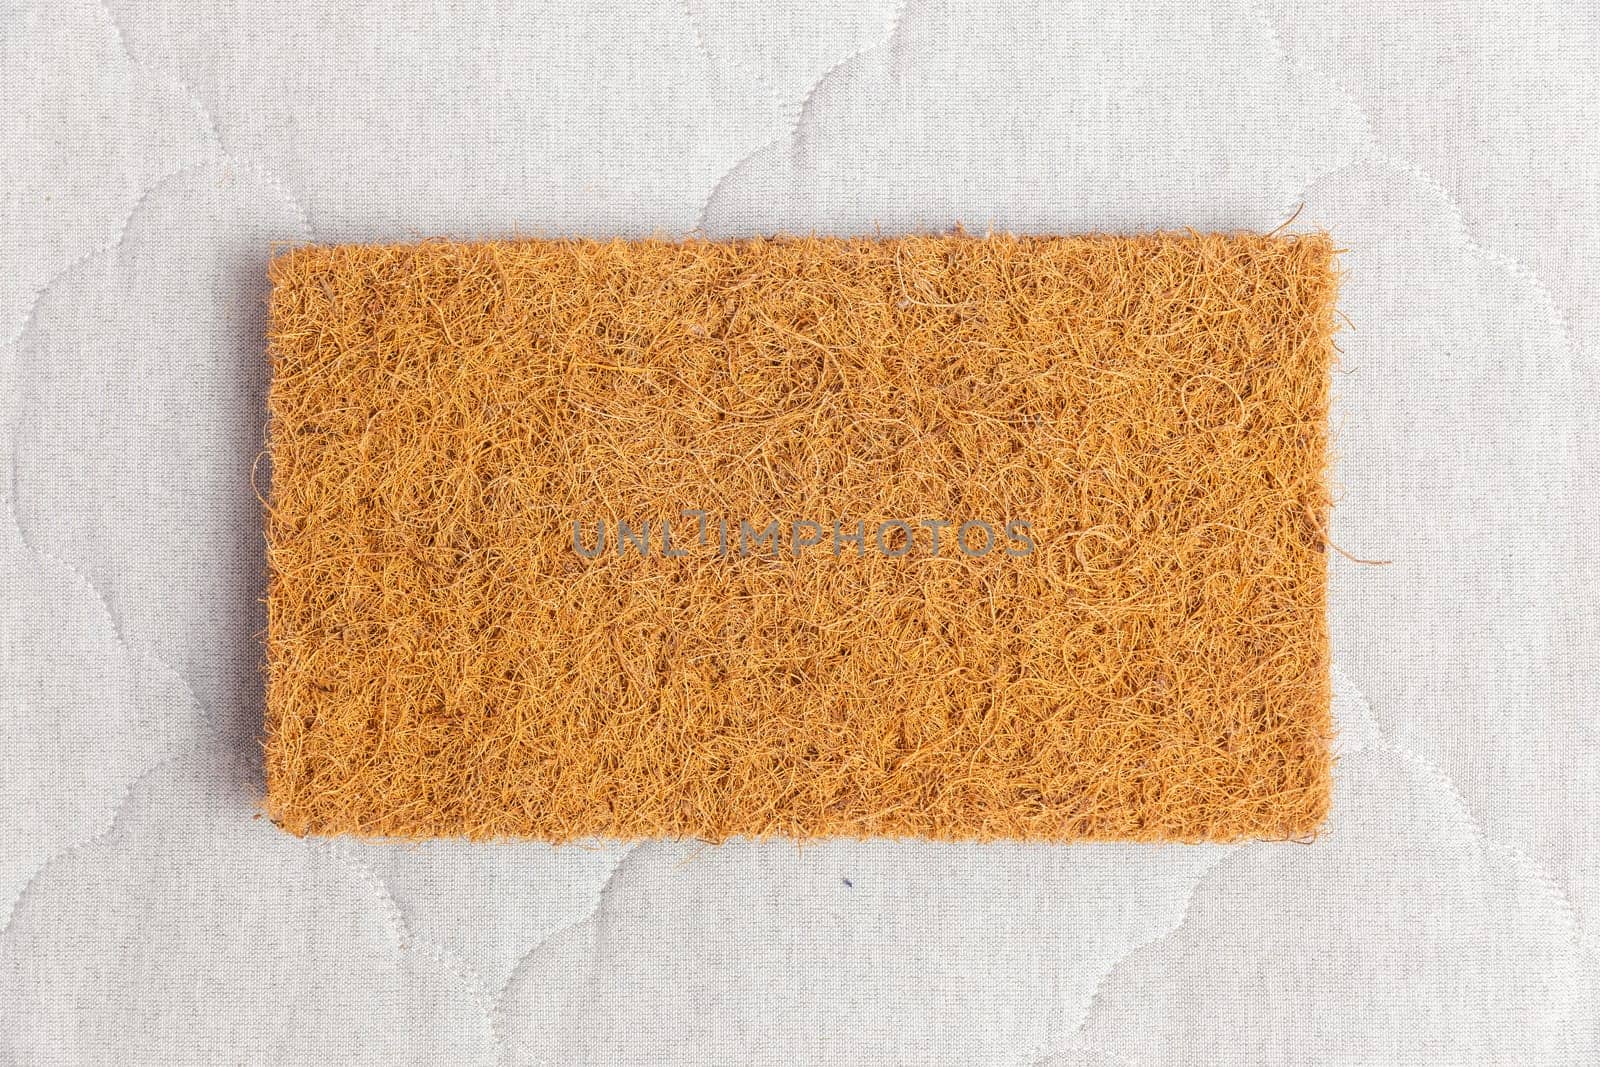 A rectangular sample of coconut coir by BY-_-BY